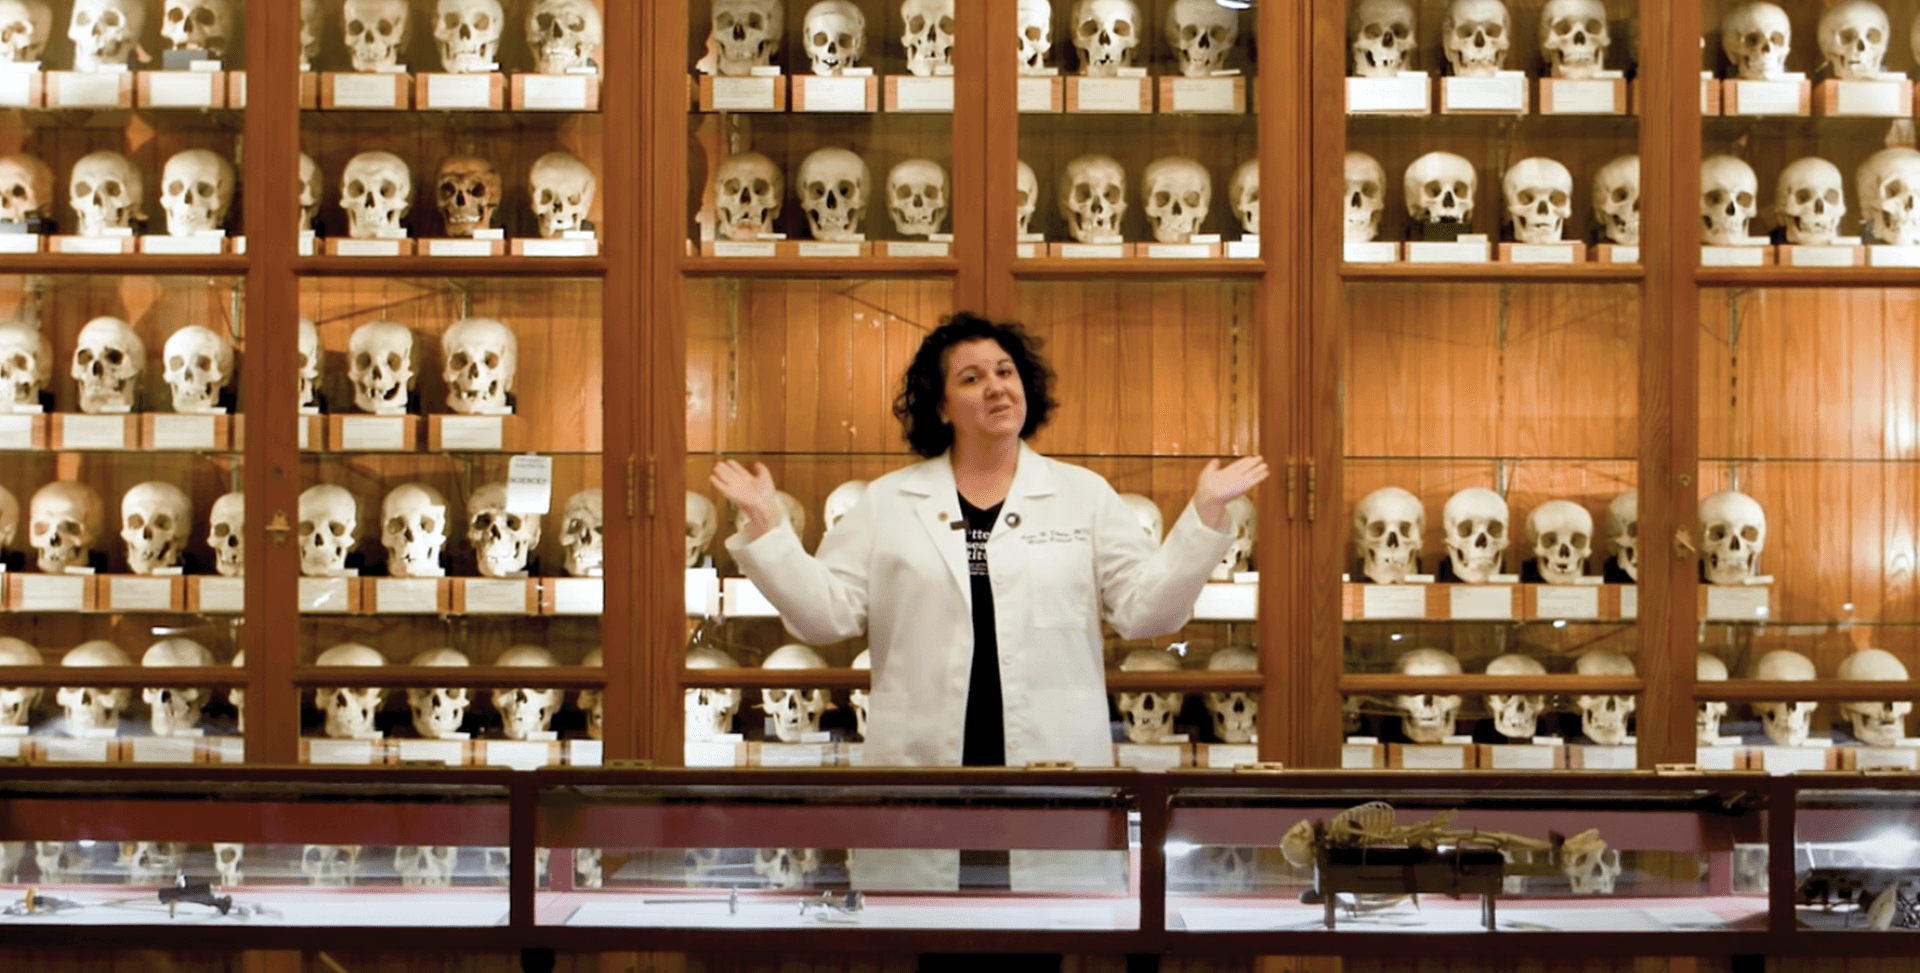 A woman in a white lab coat with her arms raised standing in front of museum cabinets filled with shelves of skulls